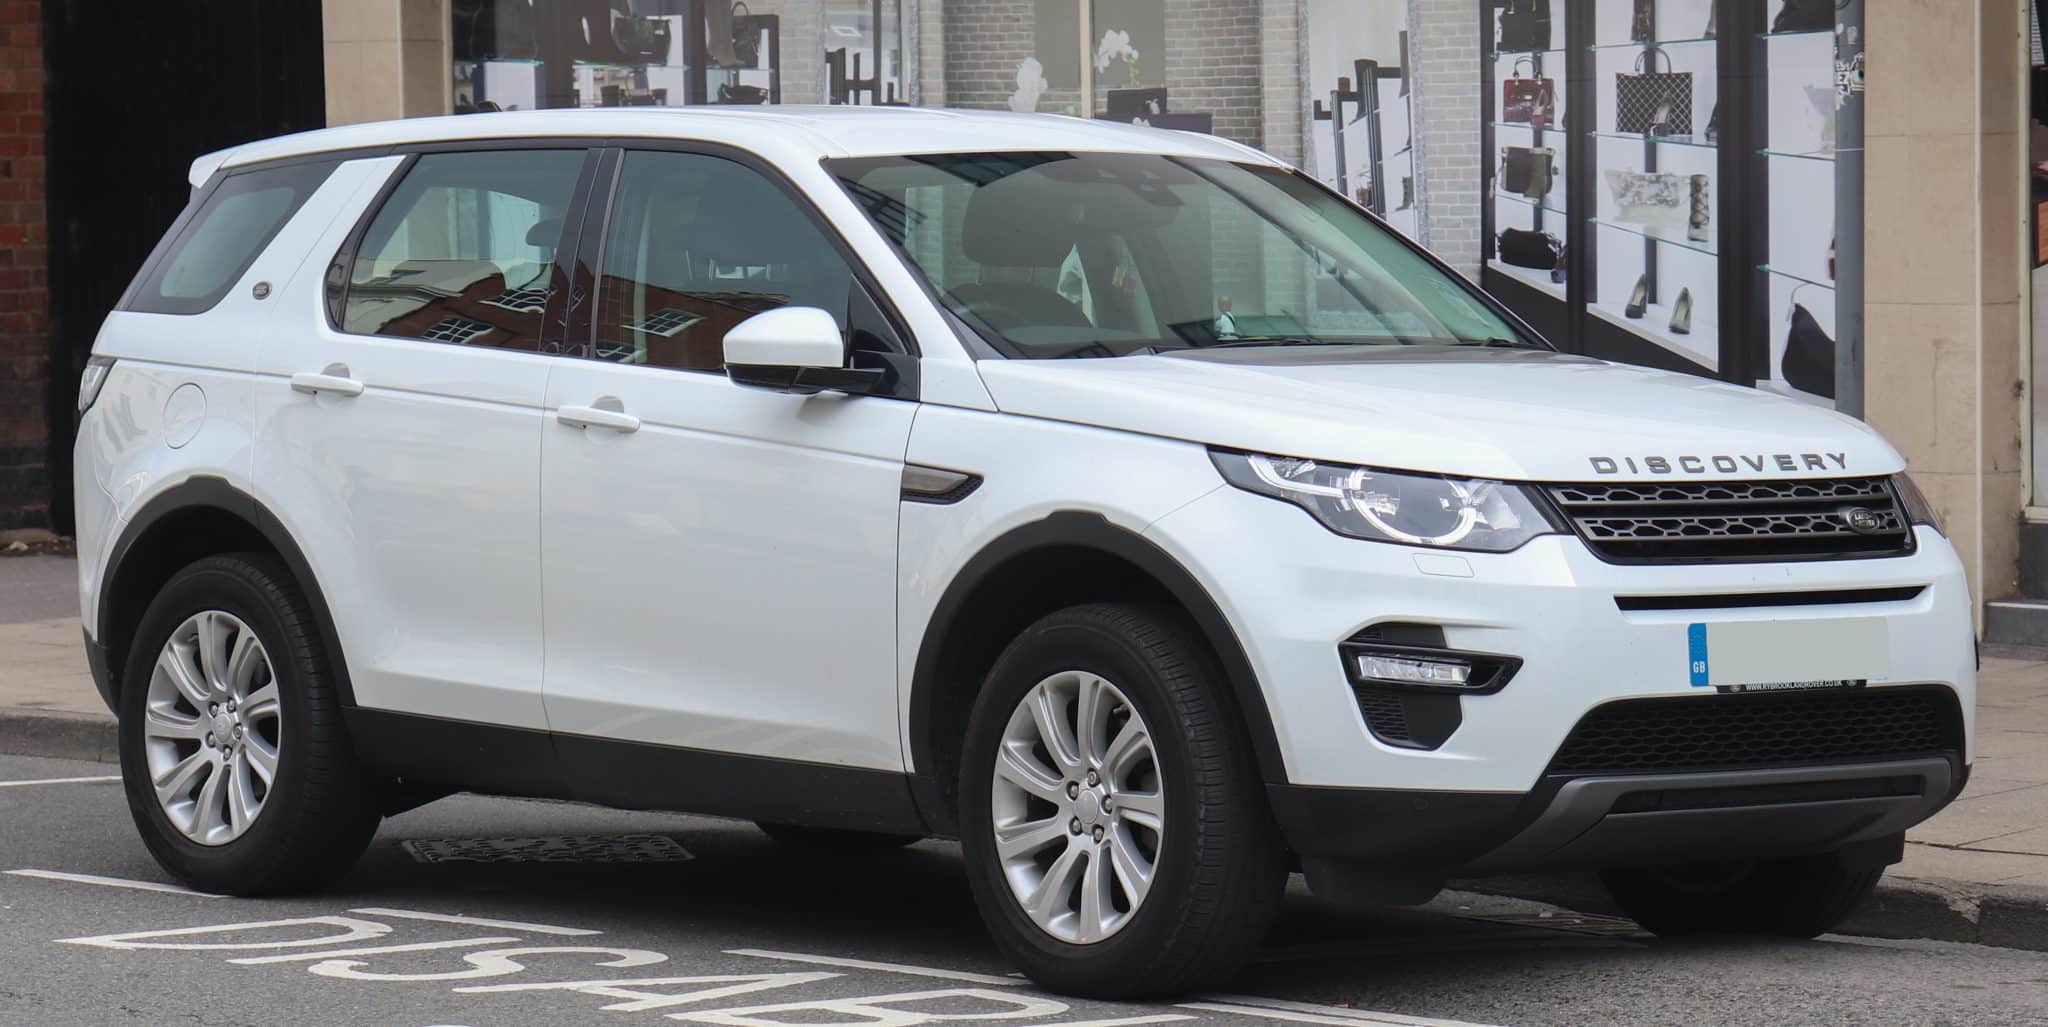 LAND ROVER DISCOVERY SPORT ▶ Impuesto Vehicular ≫